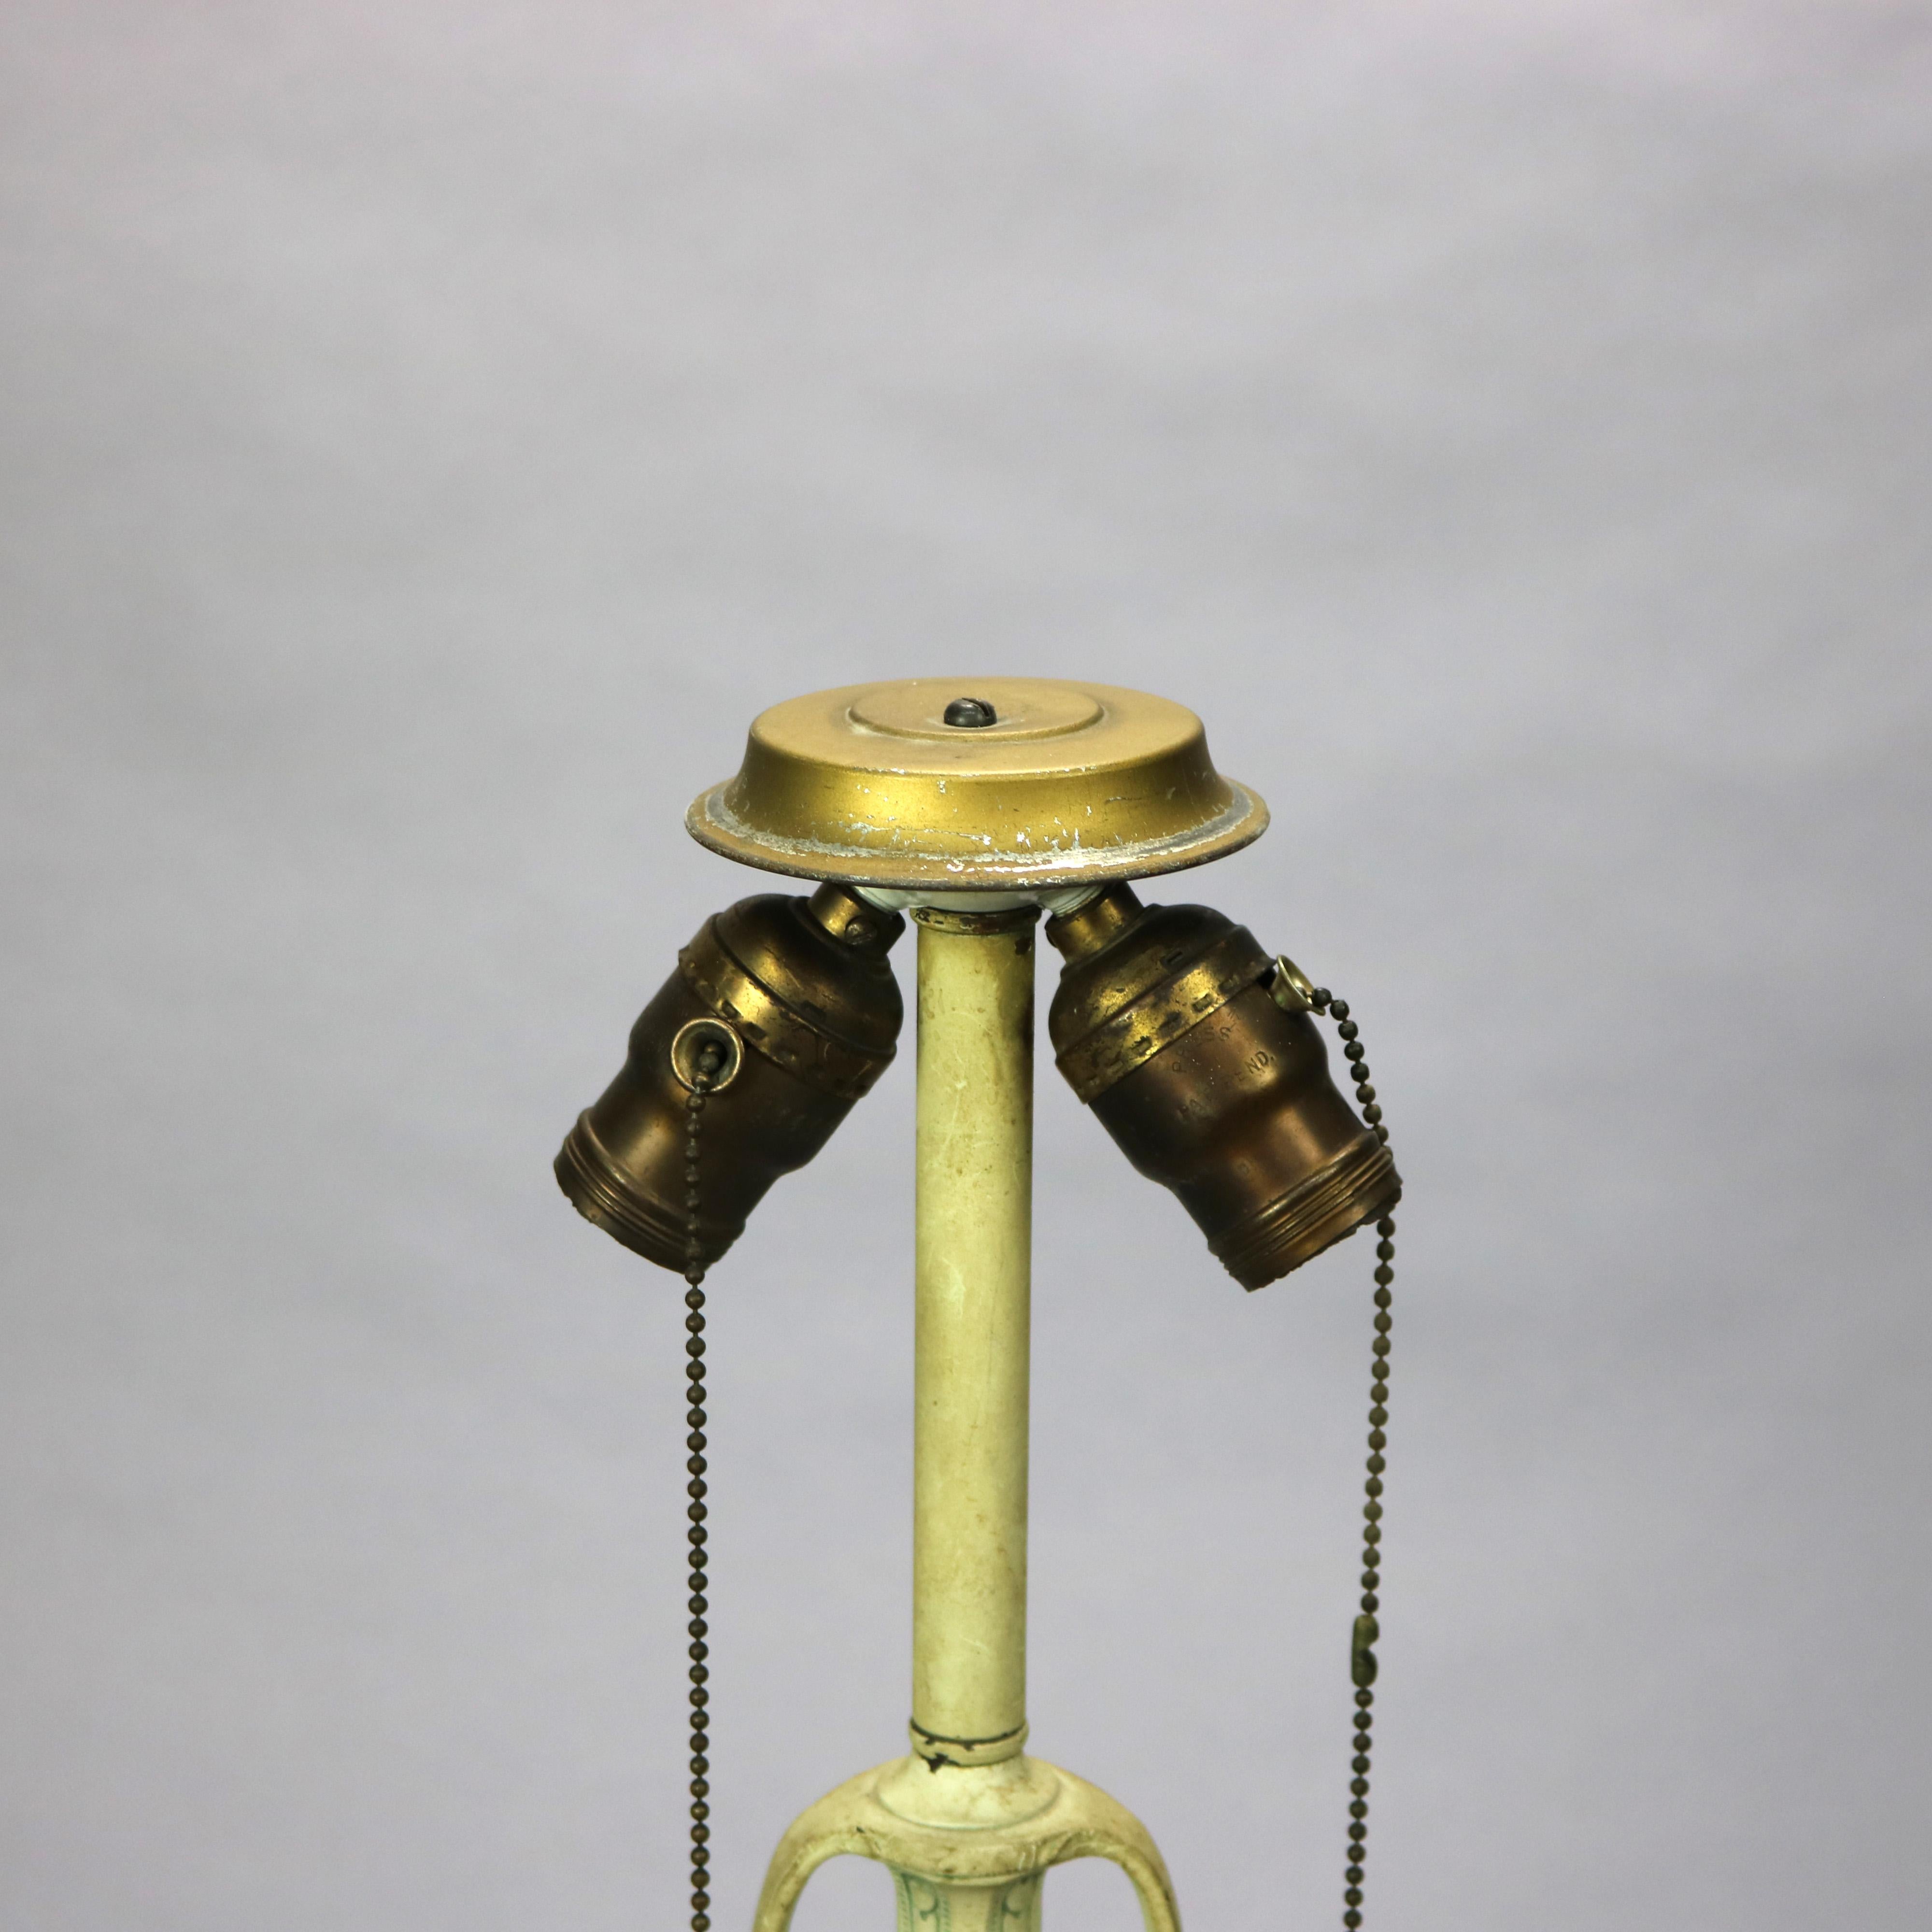 20th Century Antique Reverse Painted Pittsburgh Table Lamp with Molded Drapery Shade, c 1910